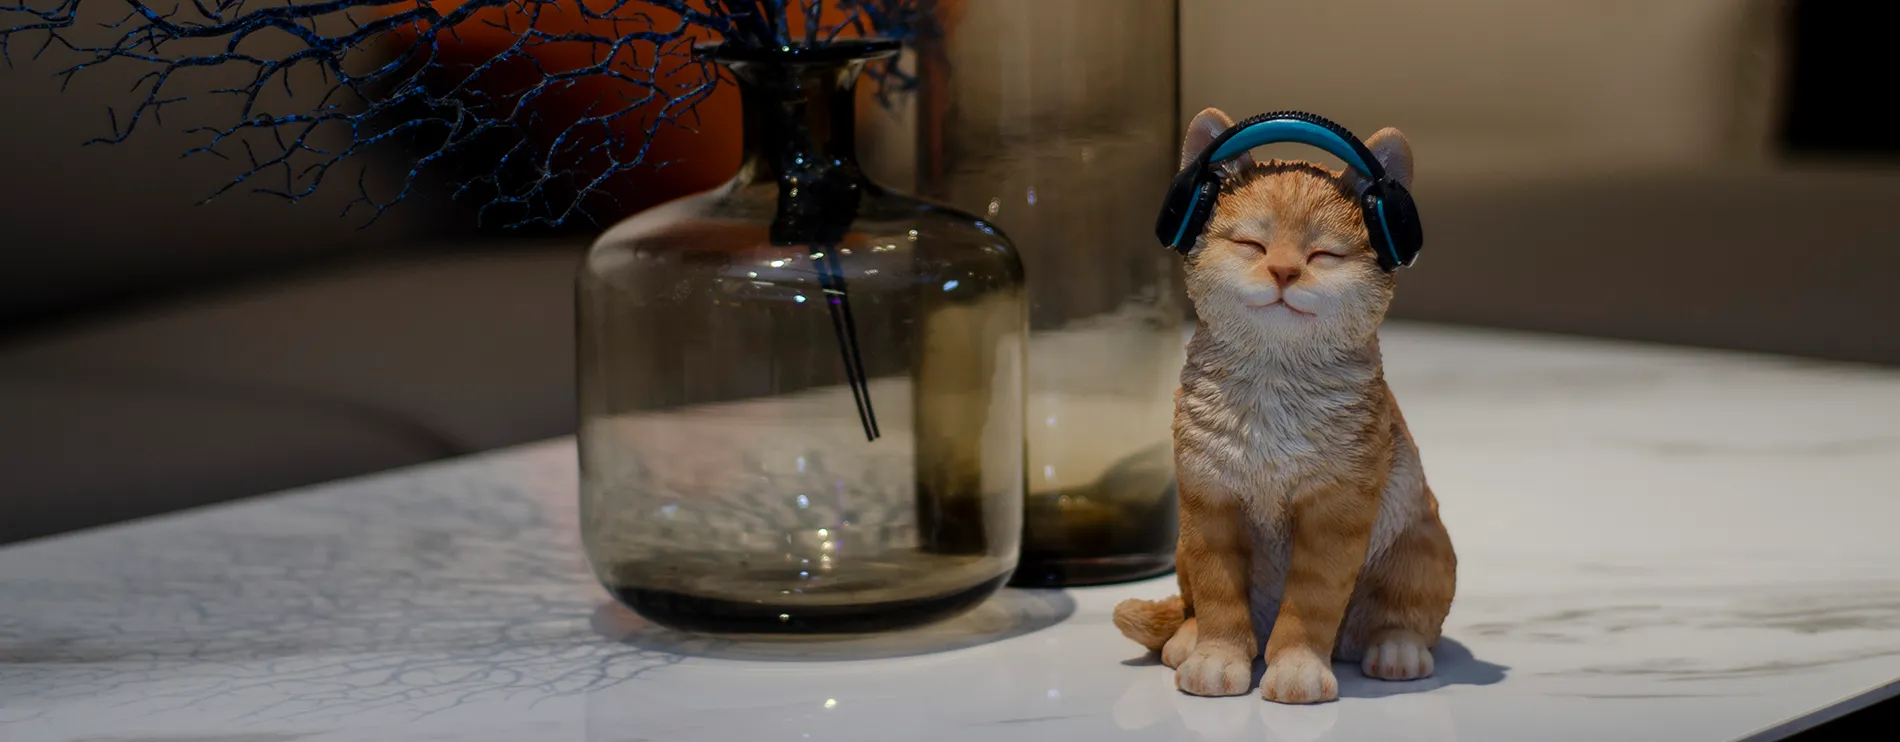 Figurine of a cat wearing headphones with its eyes closed